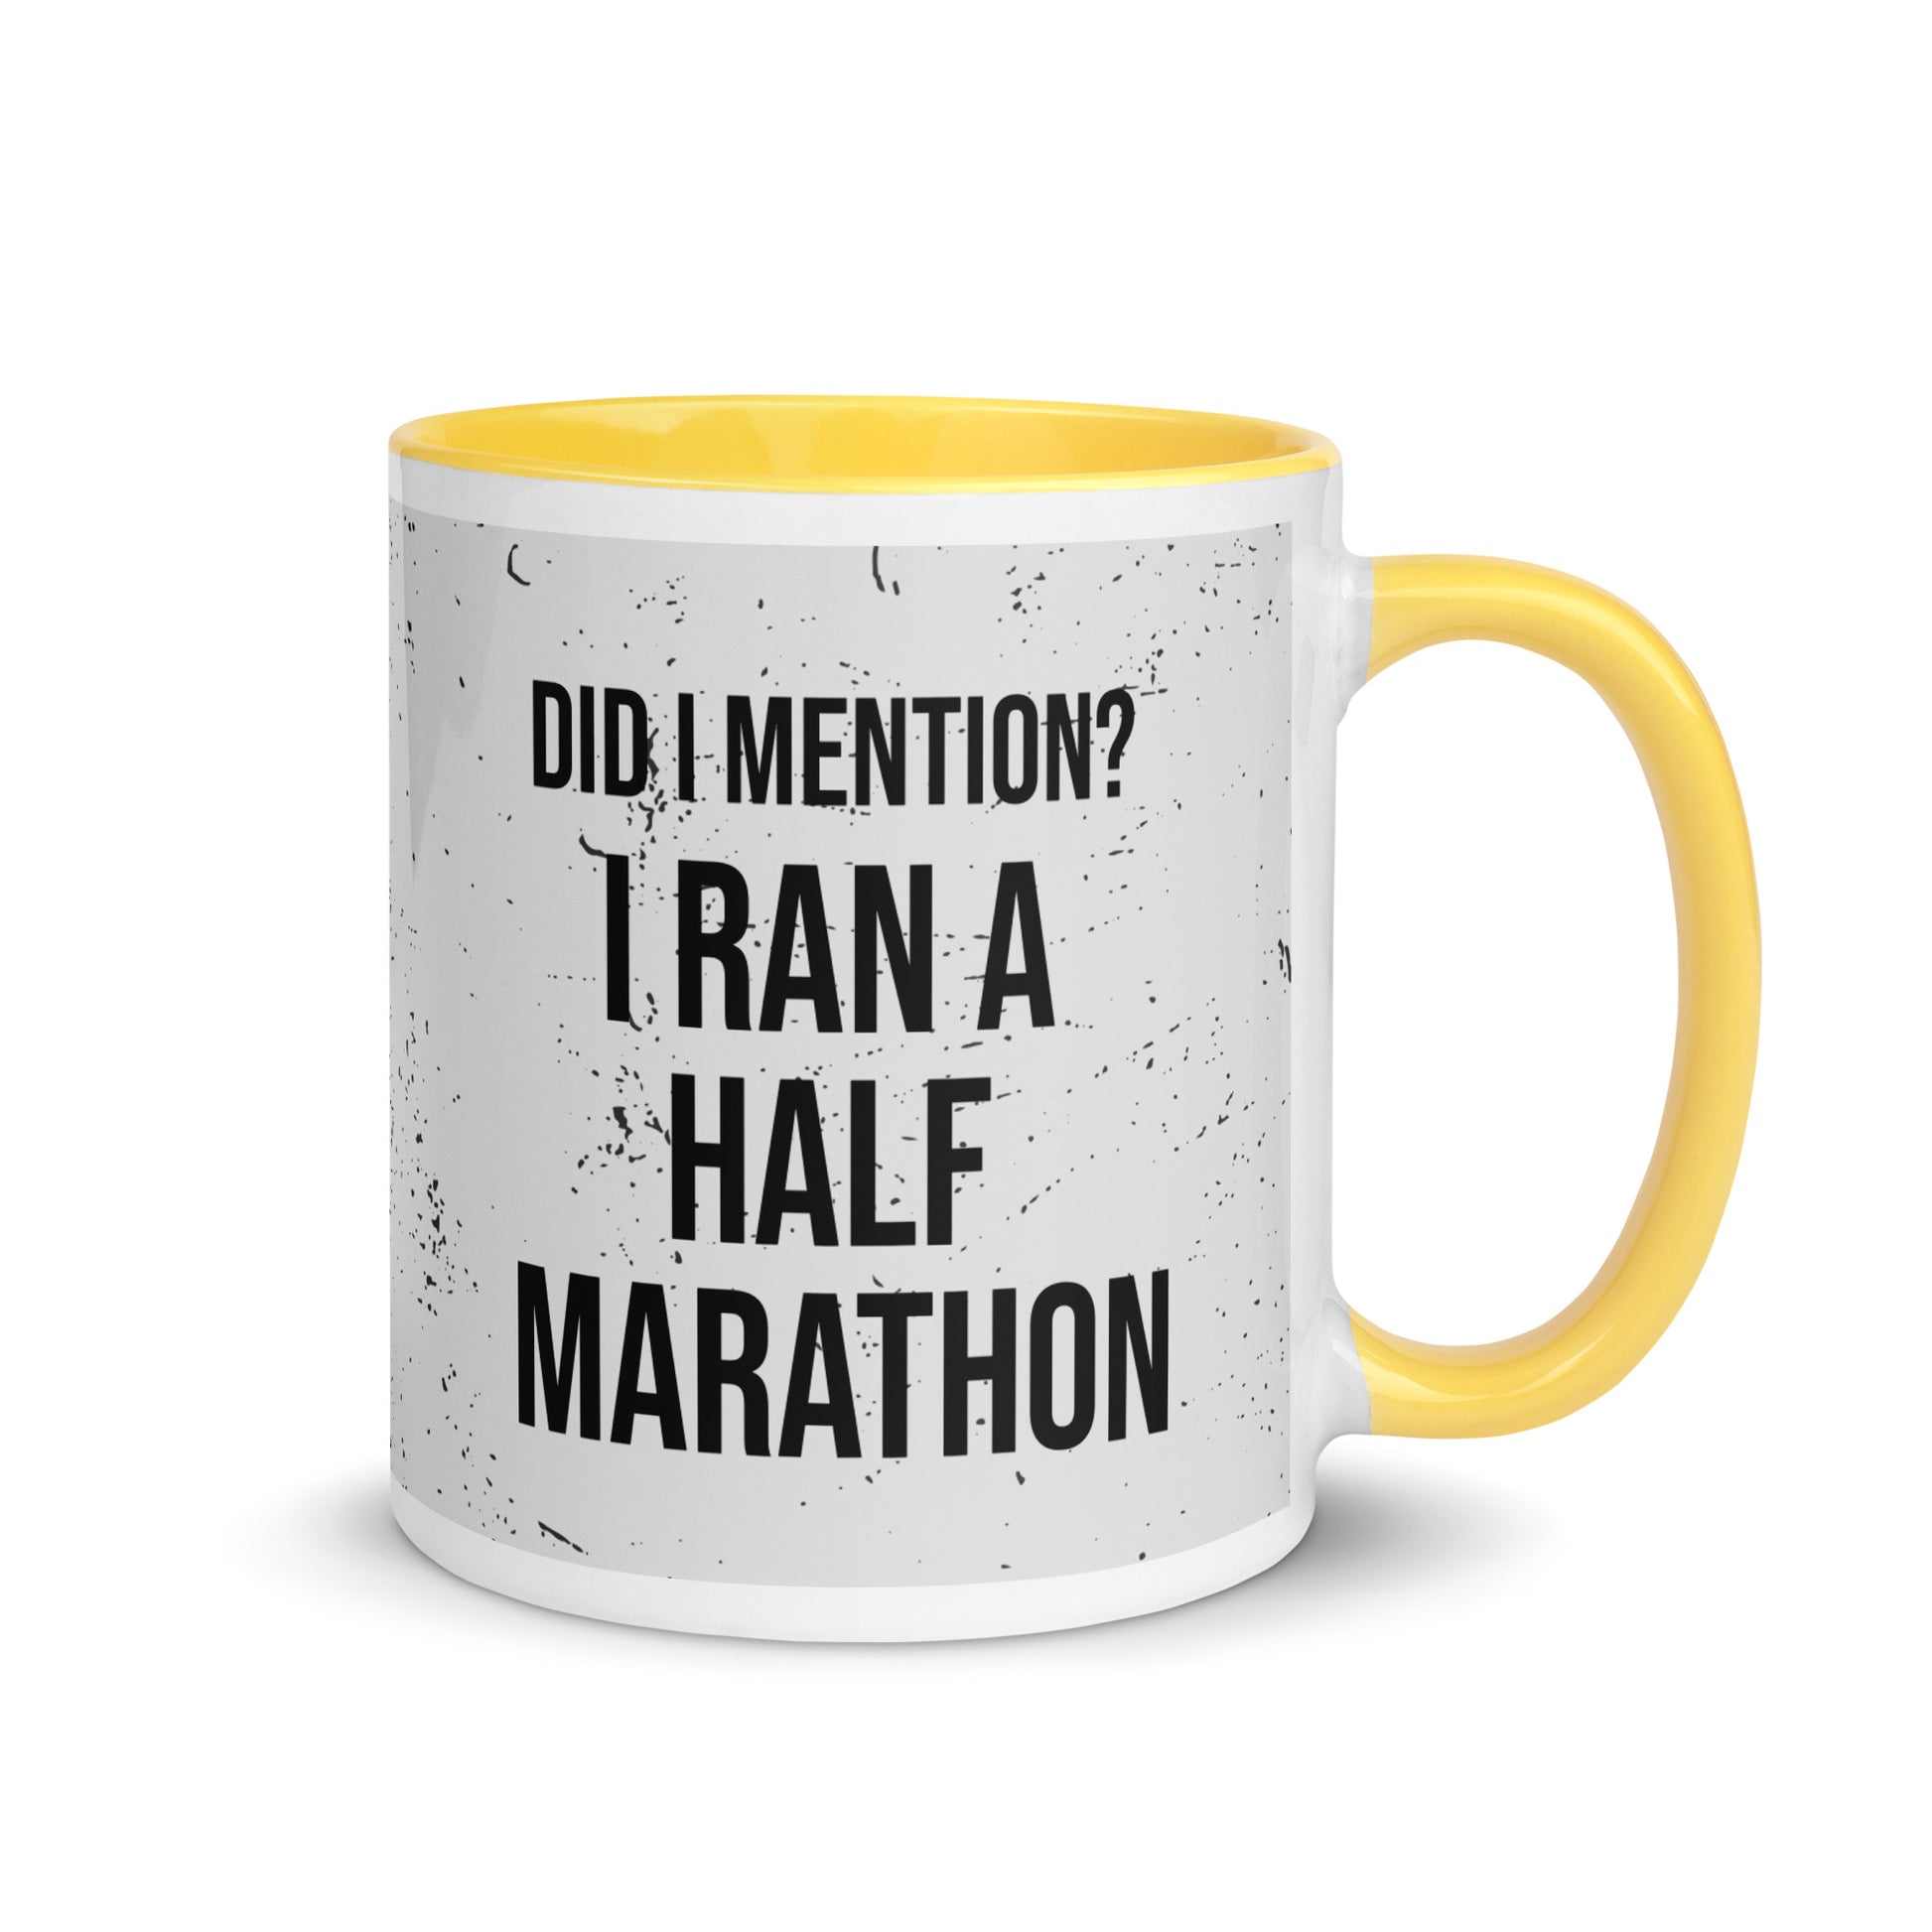 yellow handled mug with the words did I mention? I ran a half marathon in a bold font across a splatter effect background